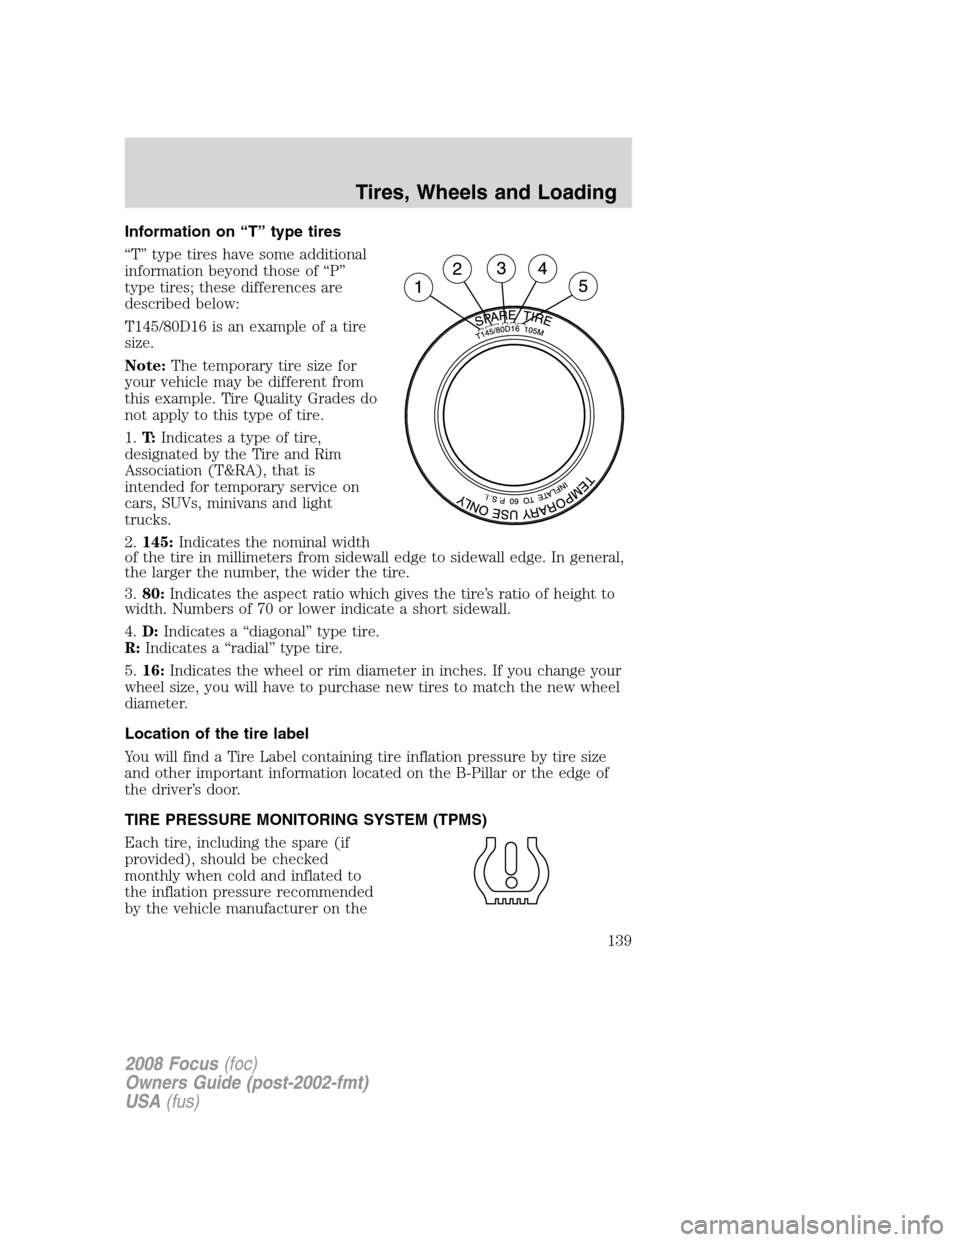 FORD FOCUS 2008 2.G Owners Manual Information on “T” type tires
“T” type tires have some additional
information beyond those of “P”
type tires; these differences are
described below:
T145/80D16 is an example of a tire
size